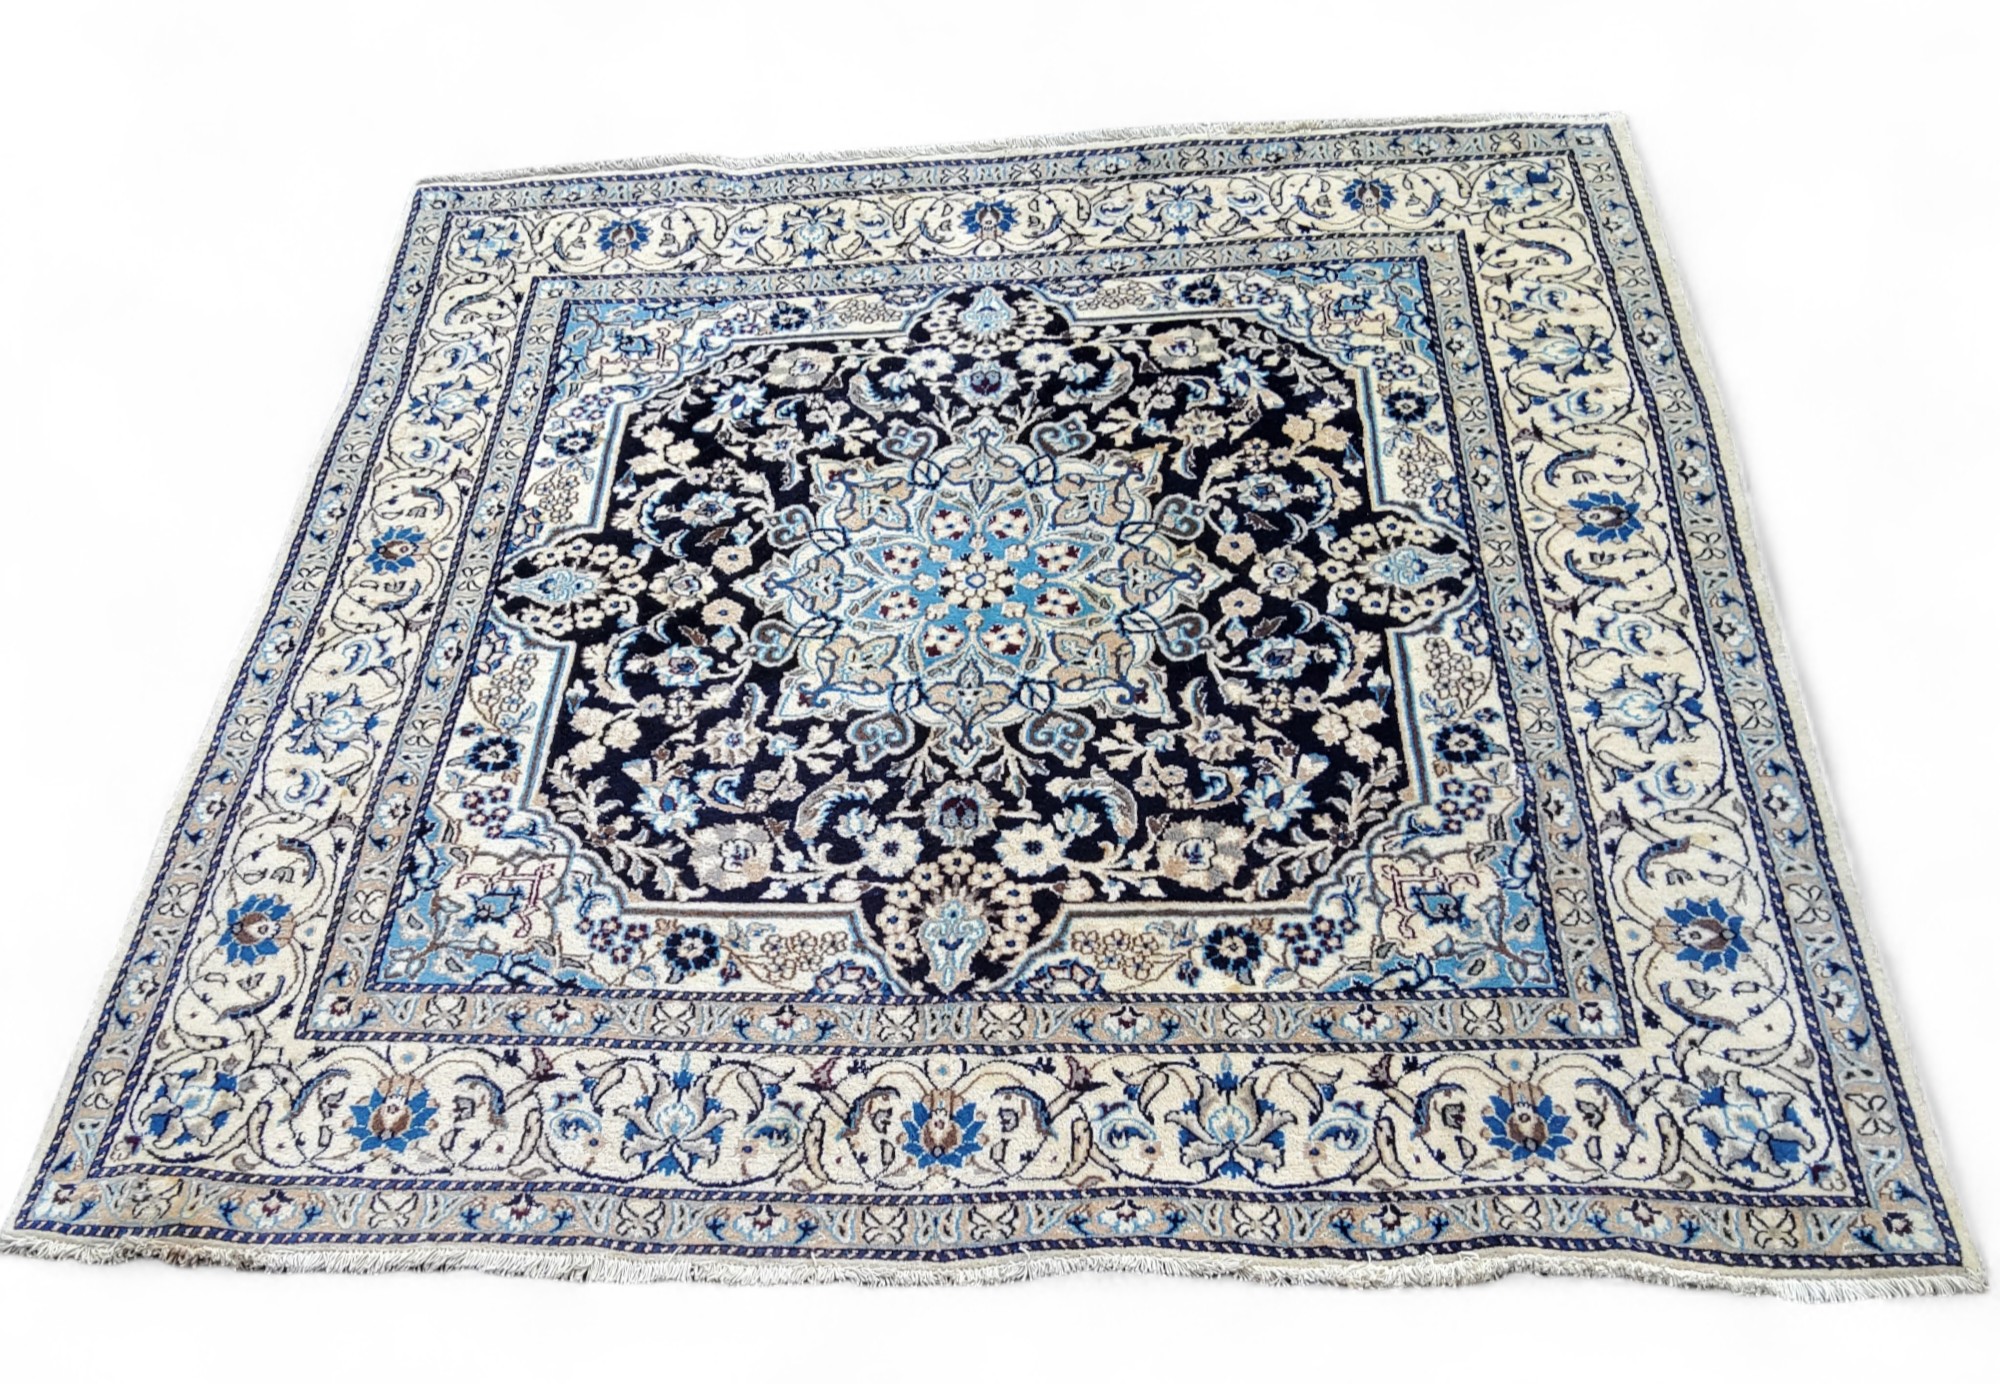 A large Persian Nain Kashmar rug, vivid tones of dark blue, white and turquoise, 195cm x 195cm - Image 2 of 3